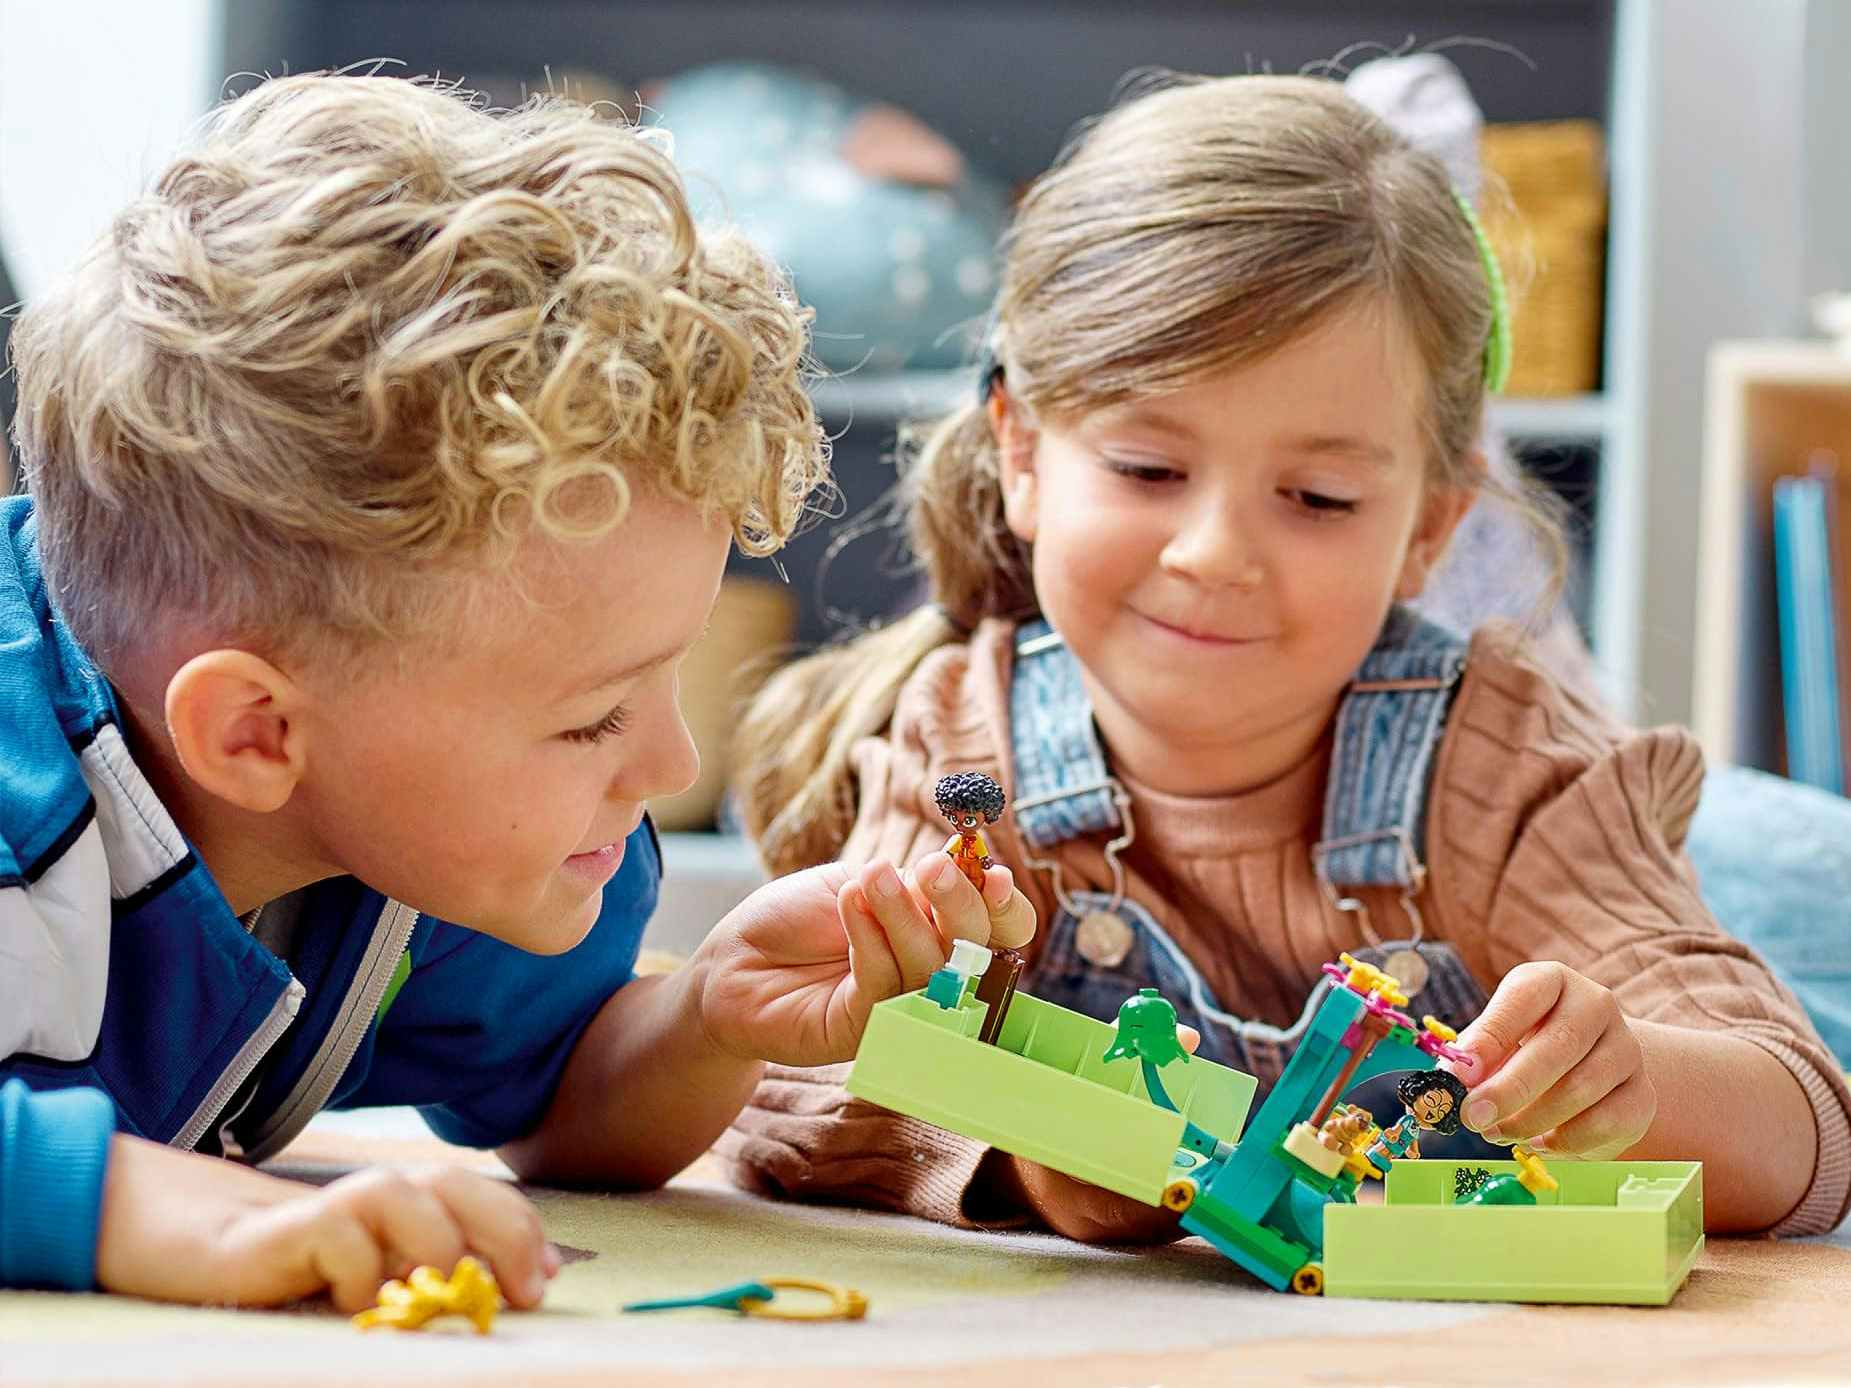 Two kids playing with a storybook Lego set